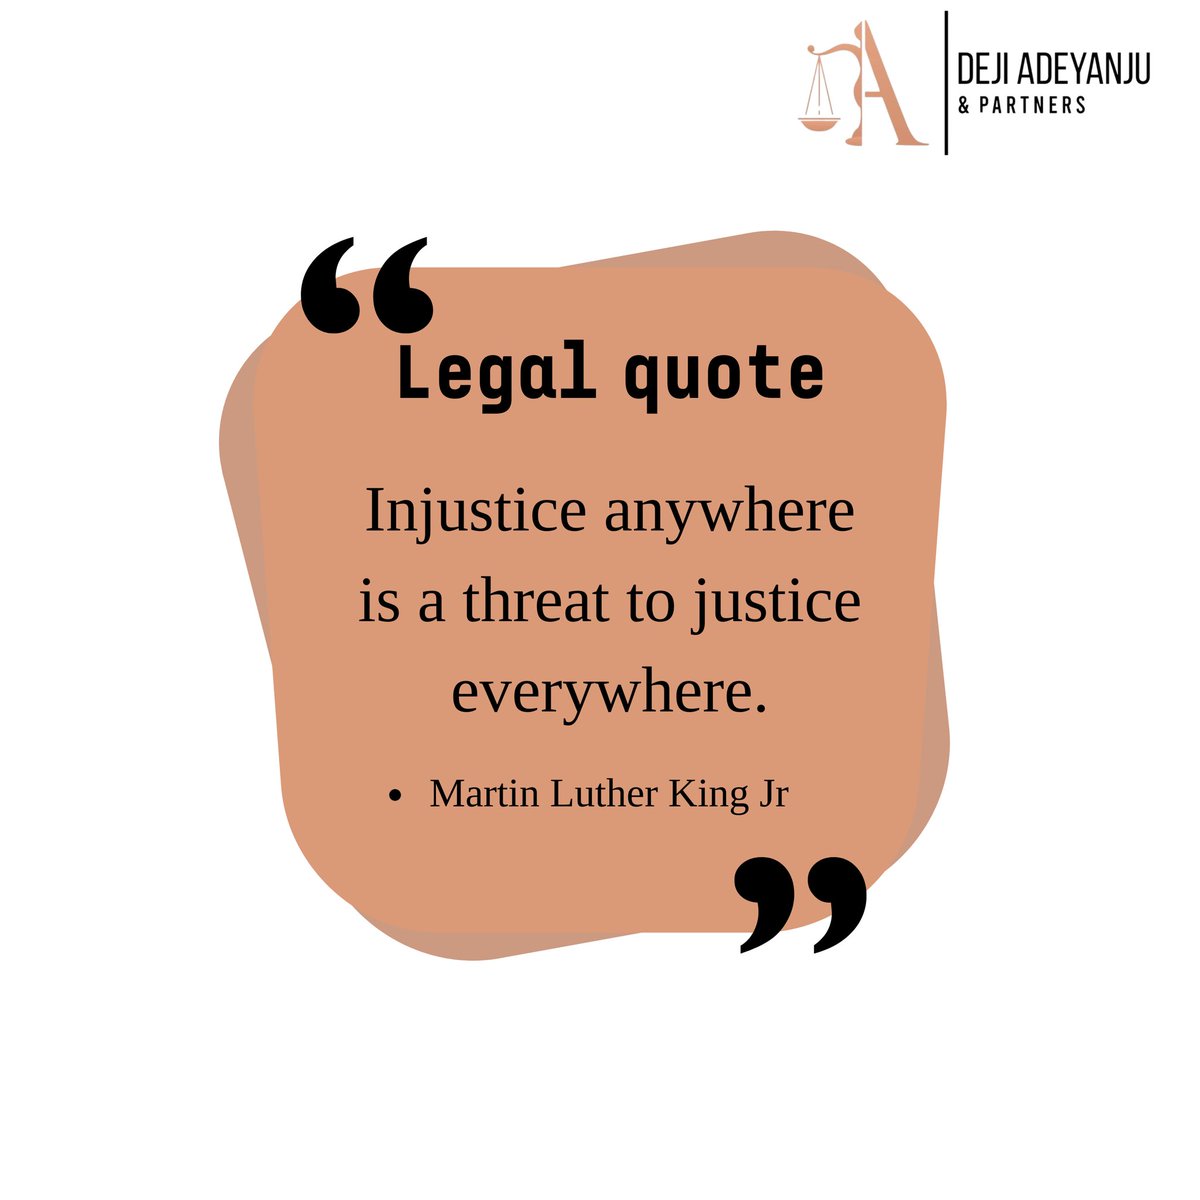 A powerful reminder that standing up for justice is essential in every corner of the world. #LegalQuotes #justiceforall